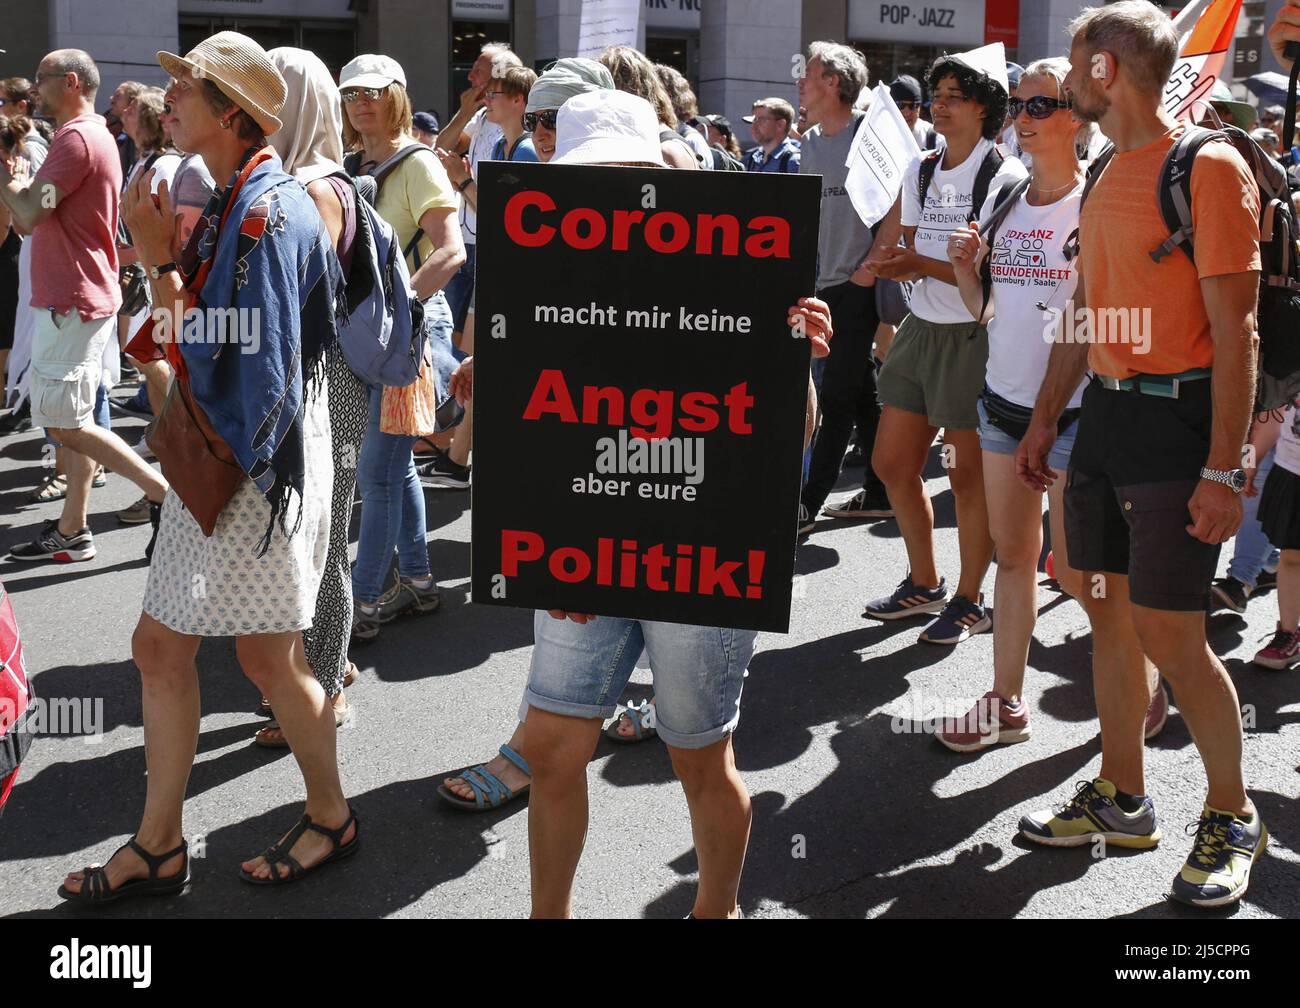 'Berlin, DEU, 01.08.20220 - In Berlin, thousands of Corona deniers demonstrate against the restrictions in the pandemic. Distance rules were ignored. Masks are worn by hardly anyone. Organizer of the demo is the conspiracy movement ''Querdenken 711''.Berlin, DEU, 01.08.20220 - In Berlin, thousands of Corona deniers demonstrate against the restrictions in the pandemic. Distance rules were ignored. Masks are worn by hardly anyone. Organizer of the demo is the conspiracy movement ''Querdenken 711''. [automated translation]' Stock Photo